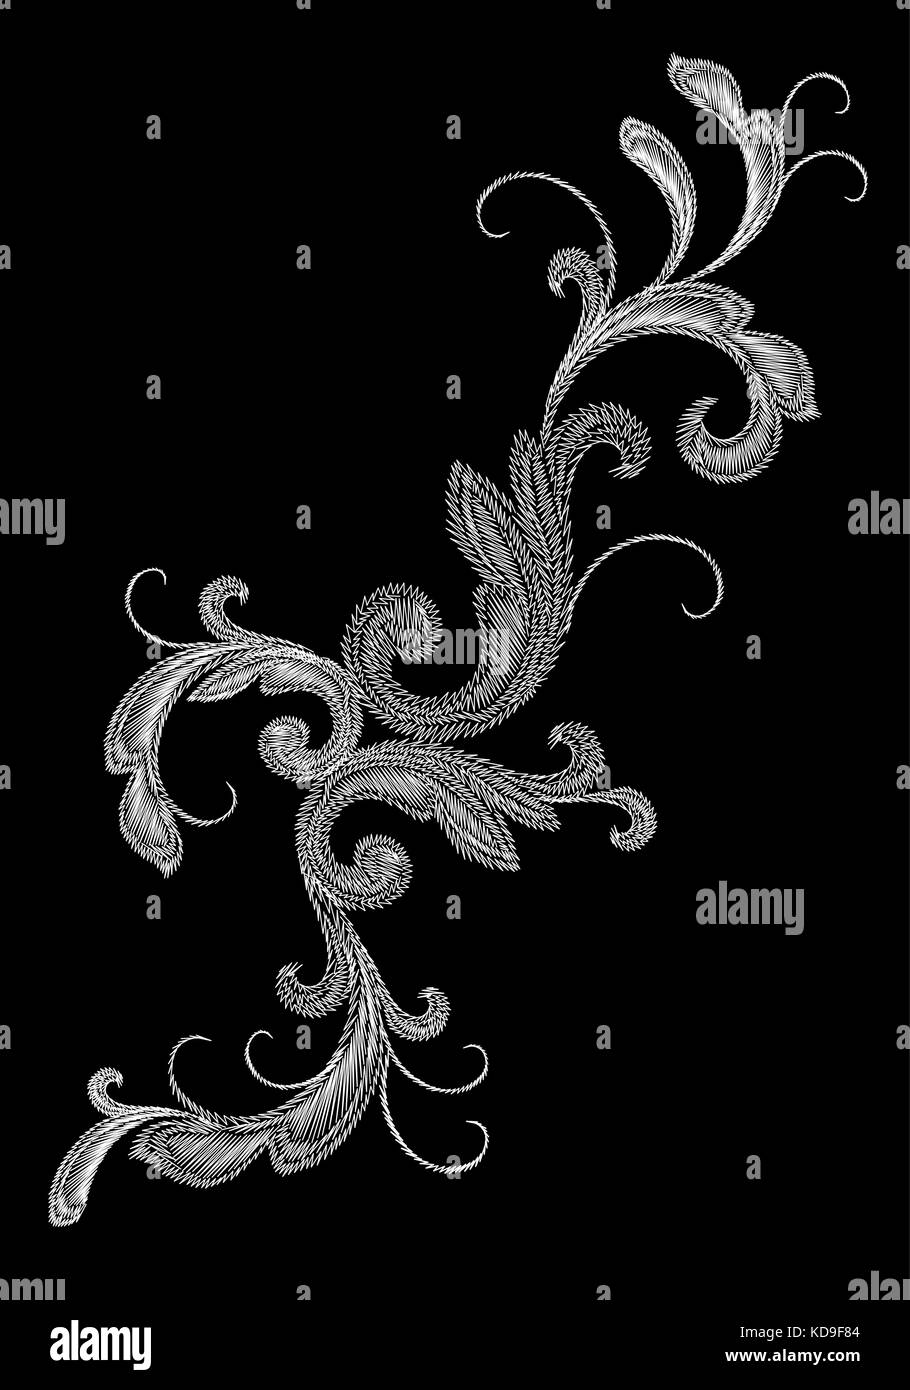 White Victorian Embroidery Floral Ornament. Stitch texture fashion print patch flower Baroque design element vector illustration art Stock Vector